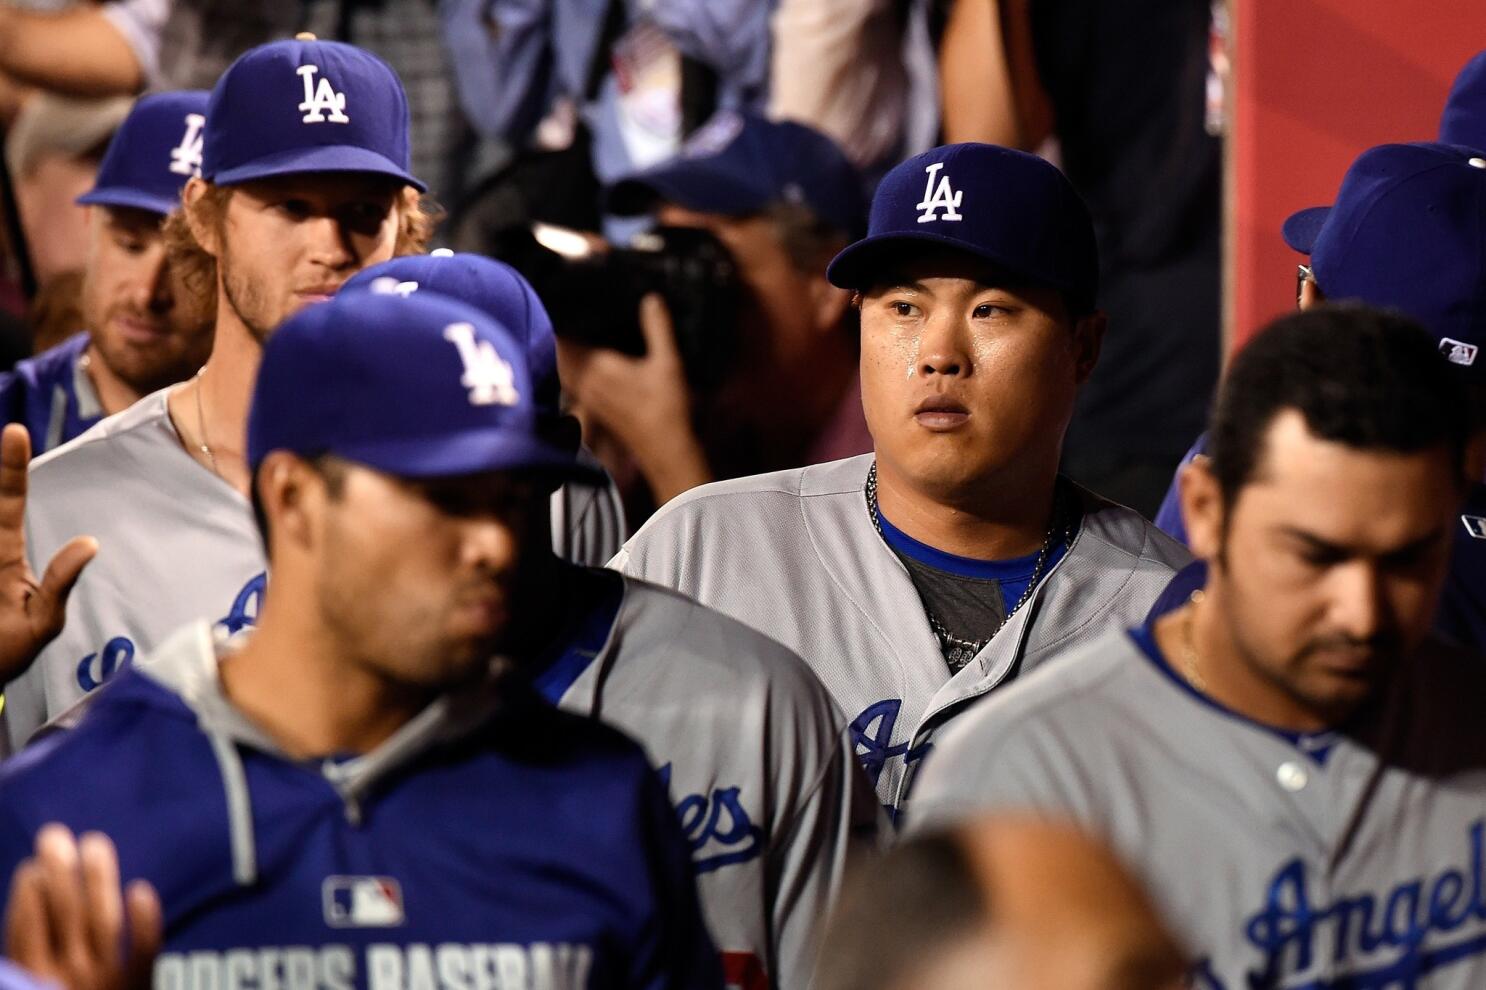 Los Angeles Dodgers pitcher Hyun-jin Ryu wore a hat with Juan